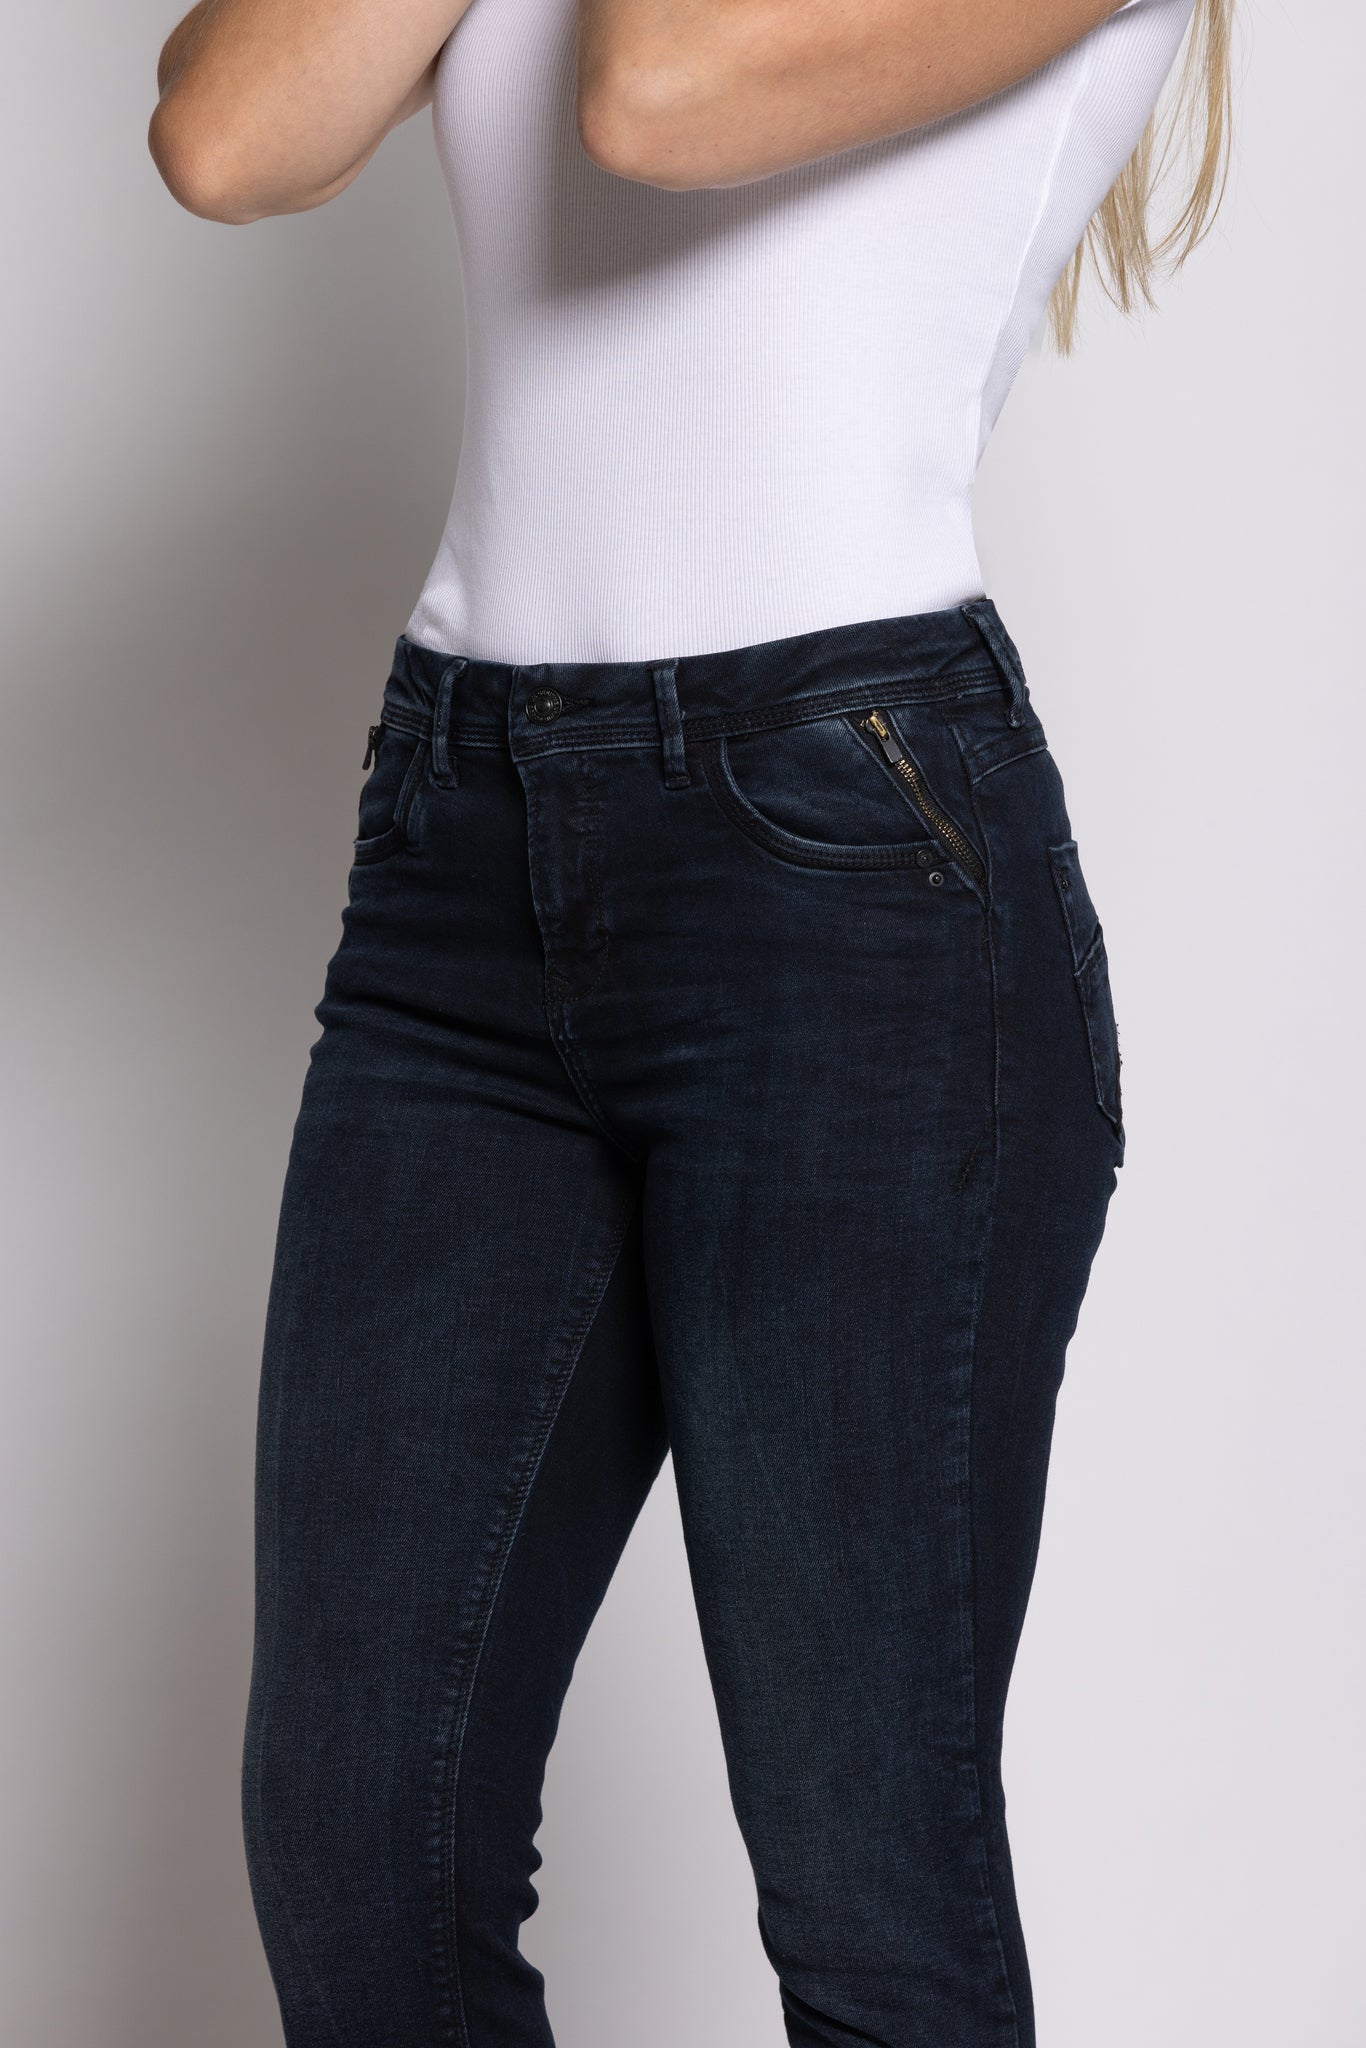 LTB - Deanna Z Jean - Miracle Wash